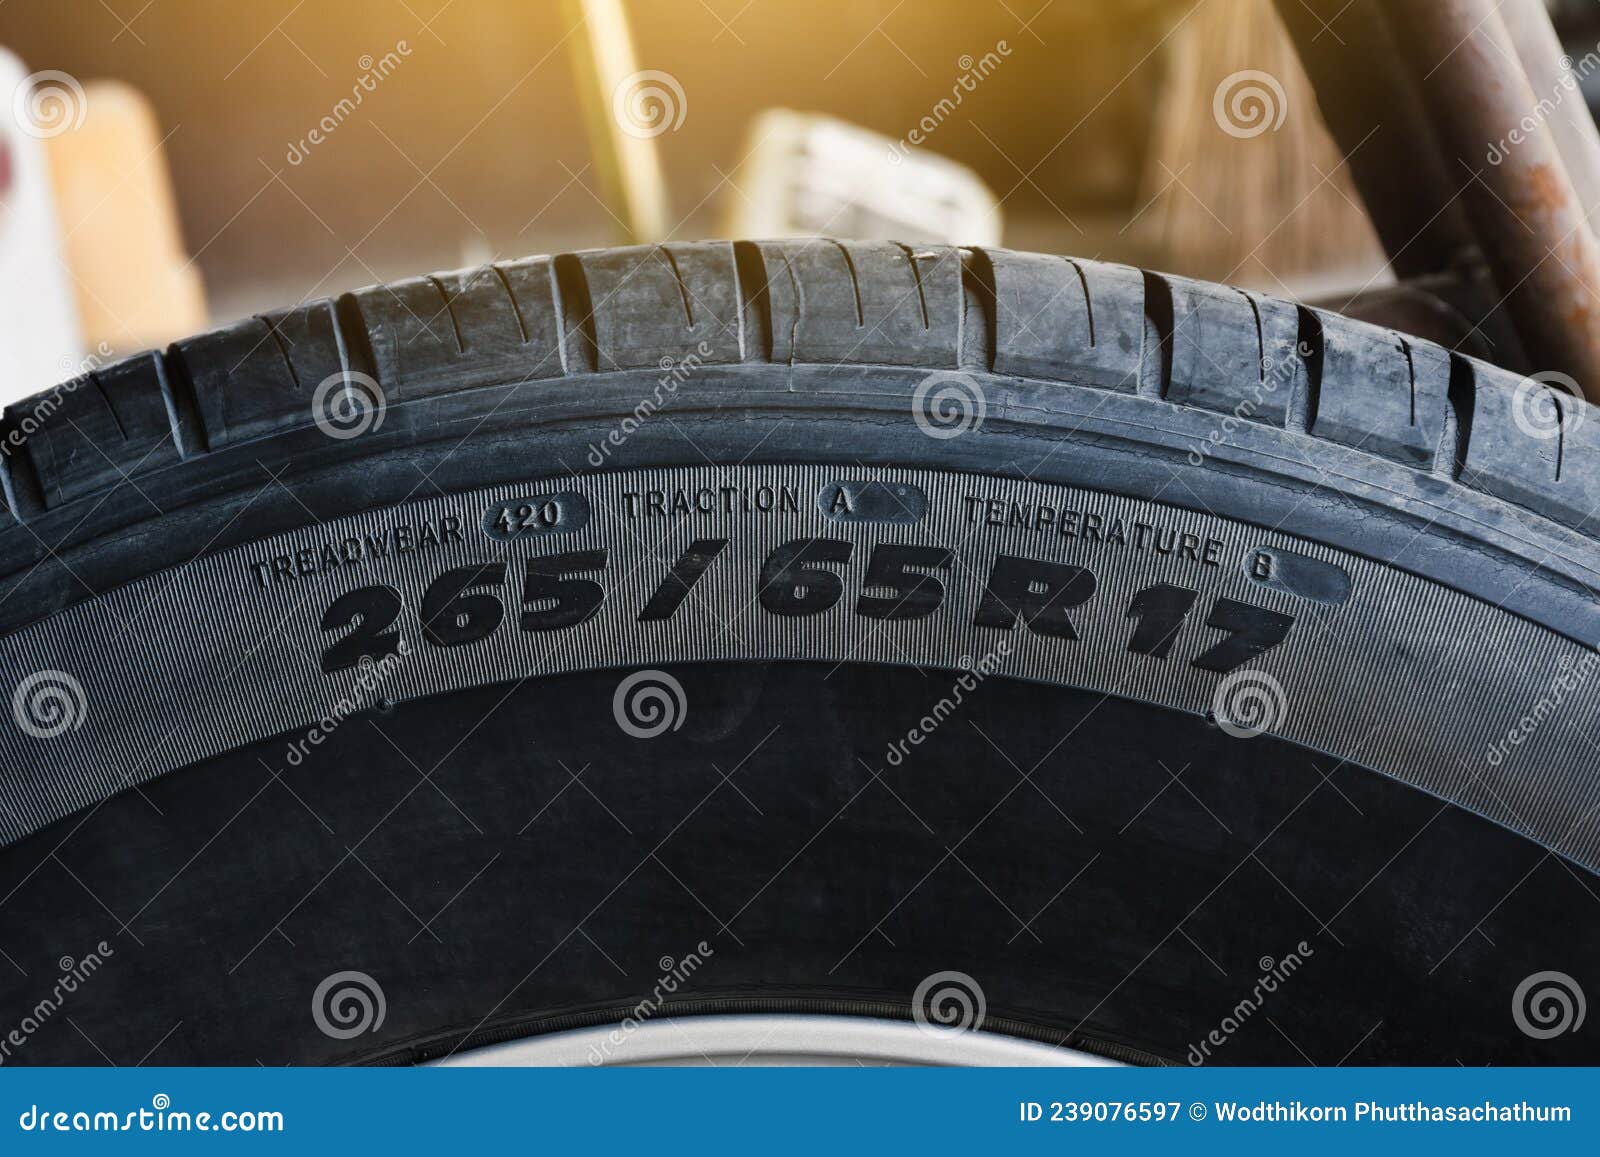 tire size and specification on the sidewall